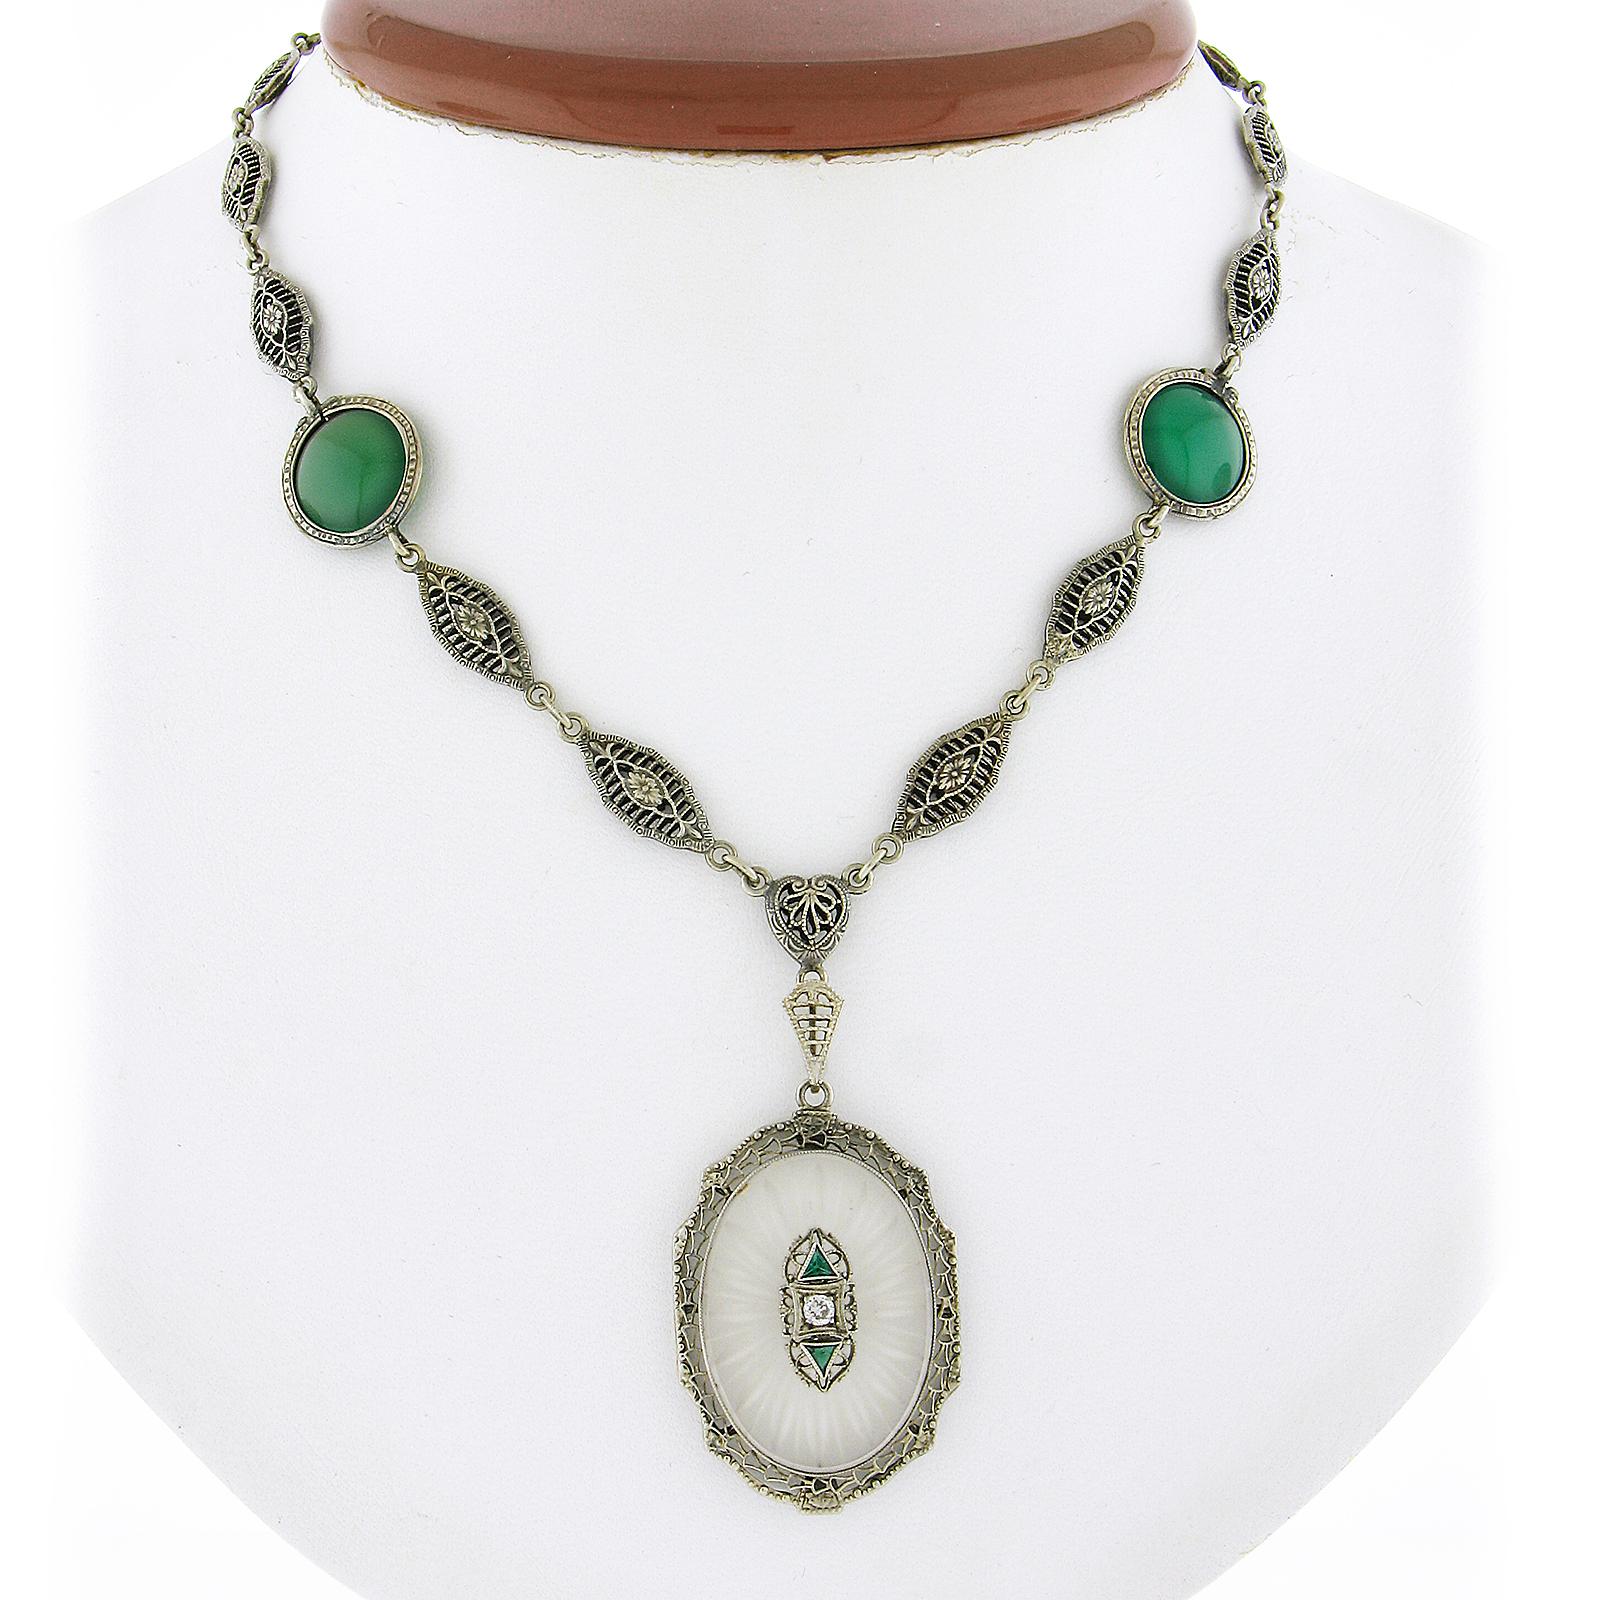 This magnificent and all original antique necklace features a large, oval-shaped, camphor glass pendant with magnificent etchings that is elegantly set and framed by intricate open filigree work throughout. The remaining part of the necklace is